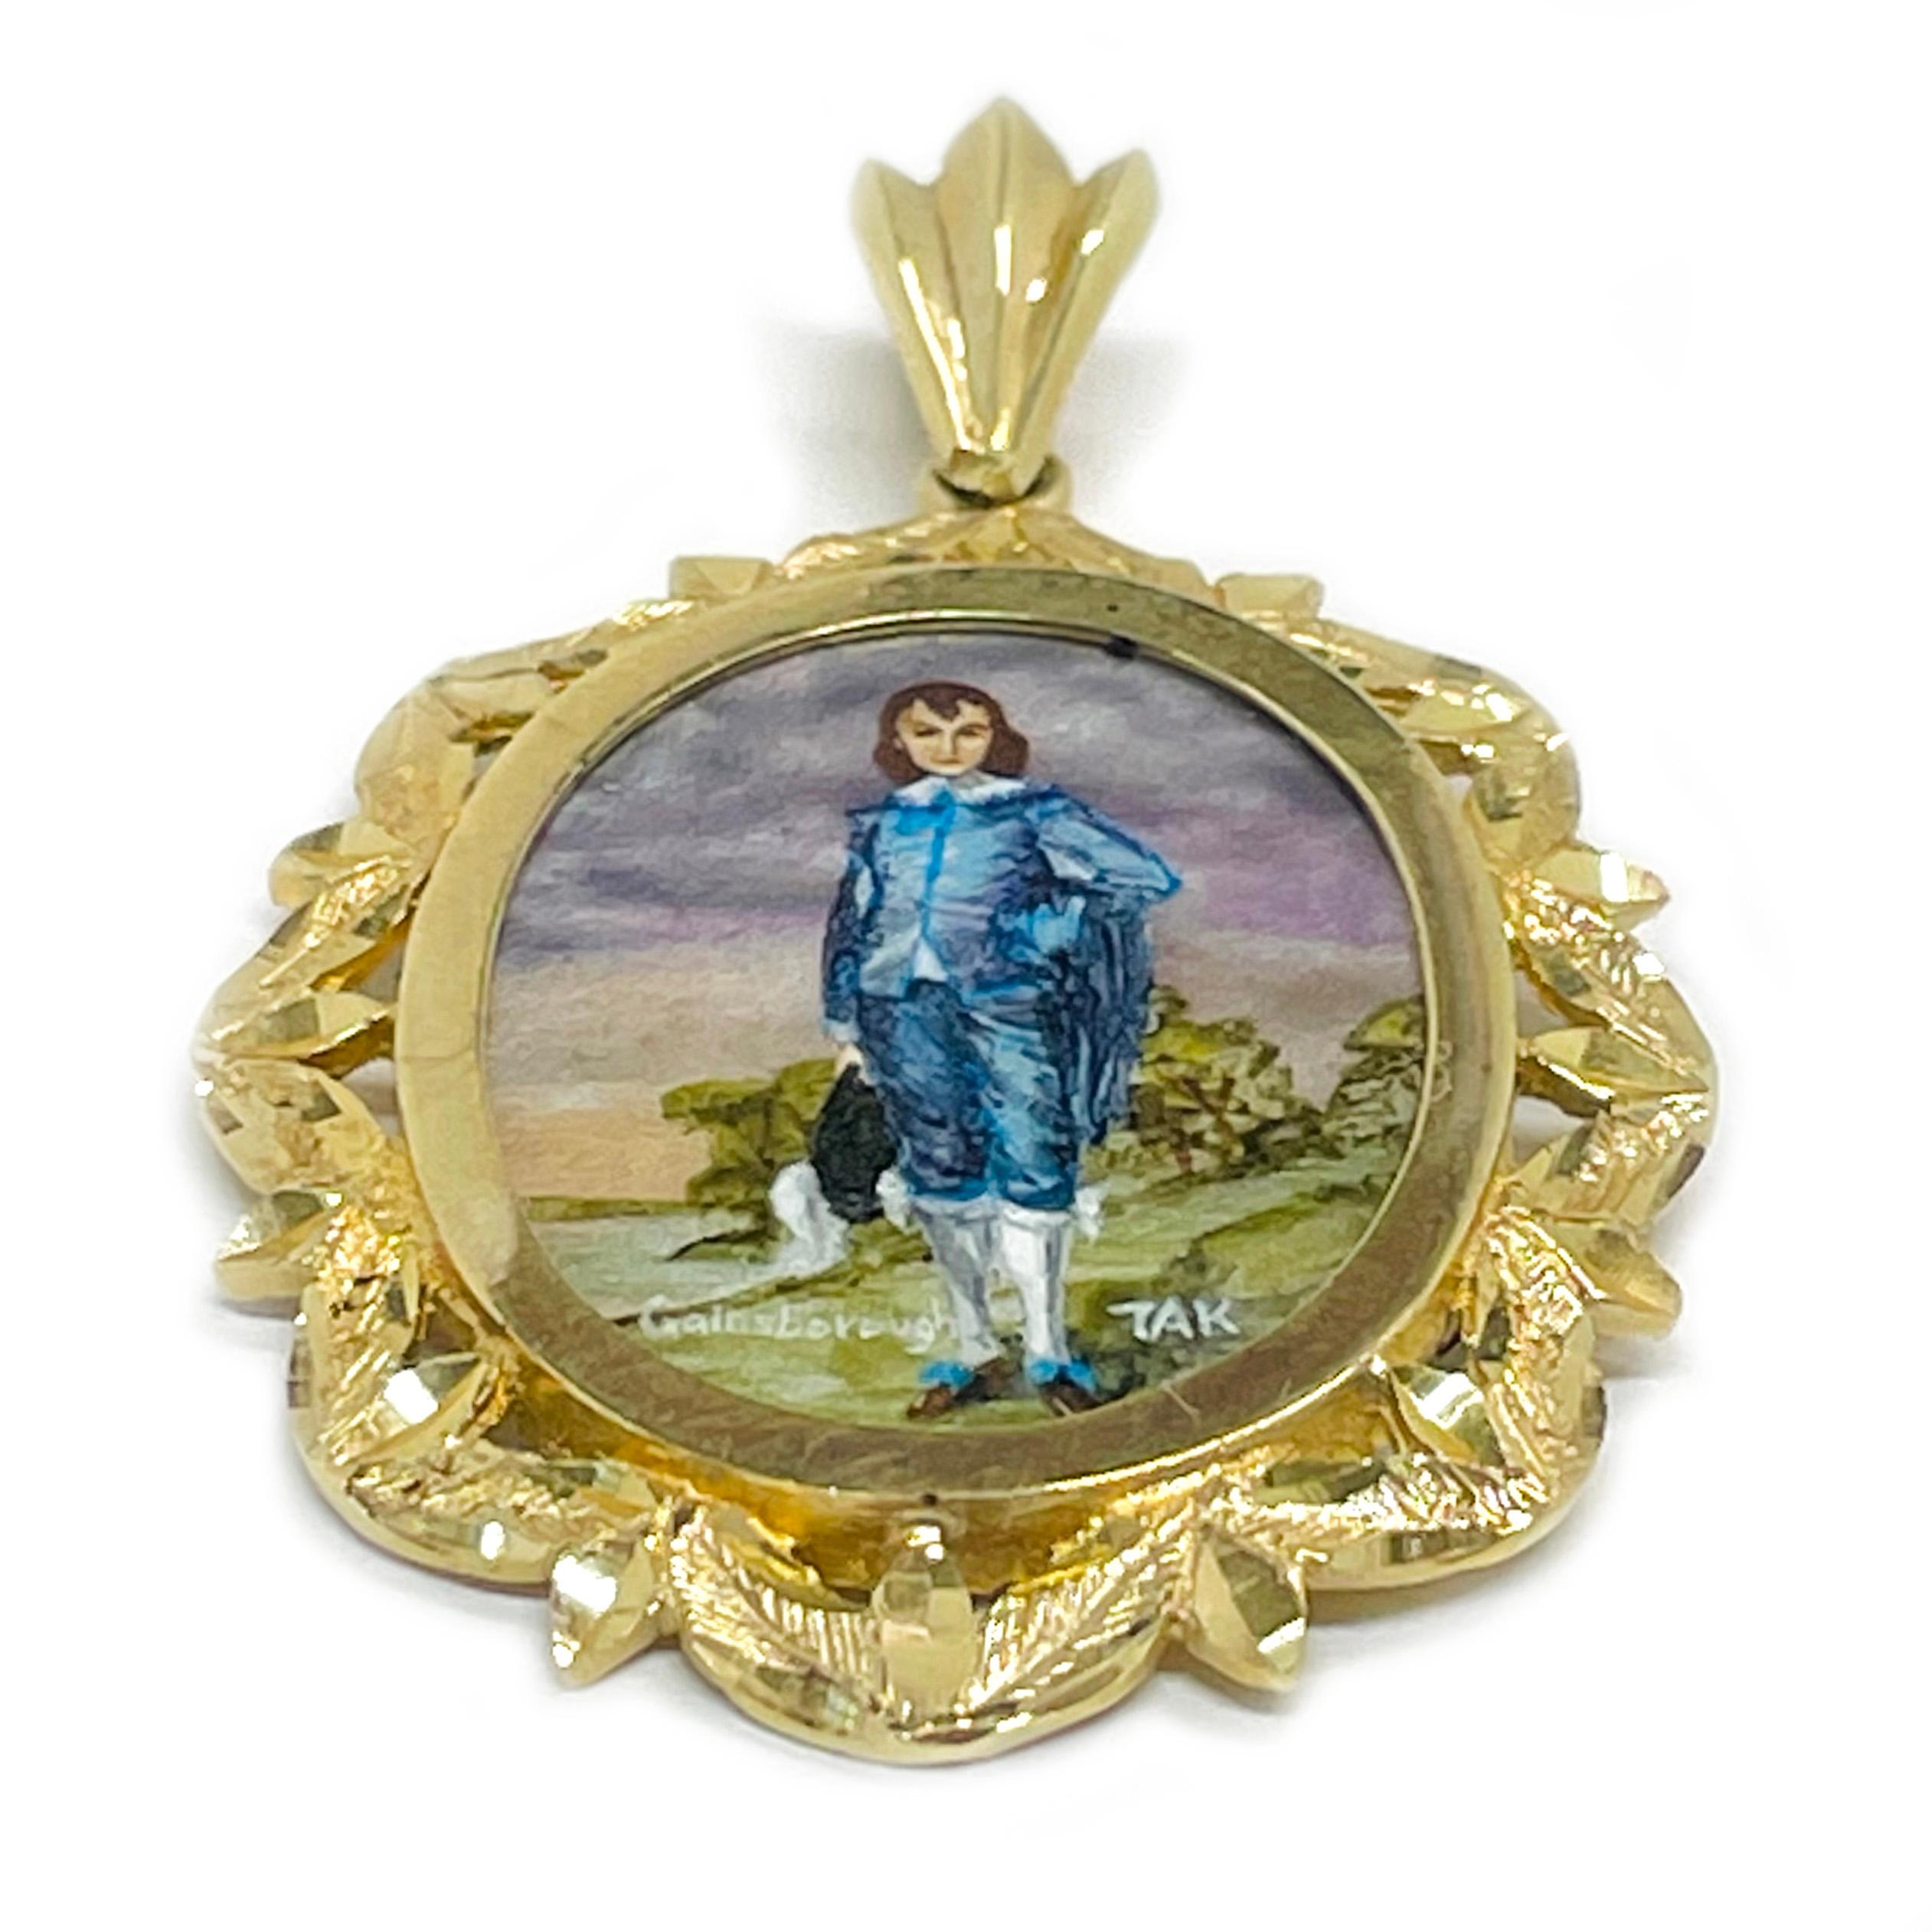 14 Karat Yellow Gold 'Blue Boy' Hand Painted Mother of Pearl Pendant. Absolutely lovely recreated Thomas Gainsborough's 'Blue Boy' painting. The miniature painting is set in a 14 karat gold ornate oval frame with diamond-cut details. The painting is